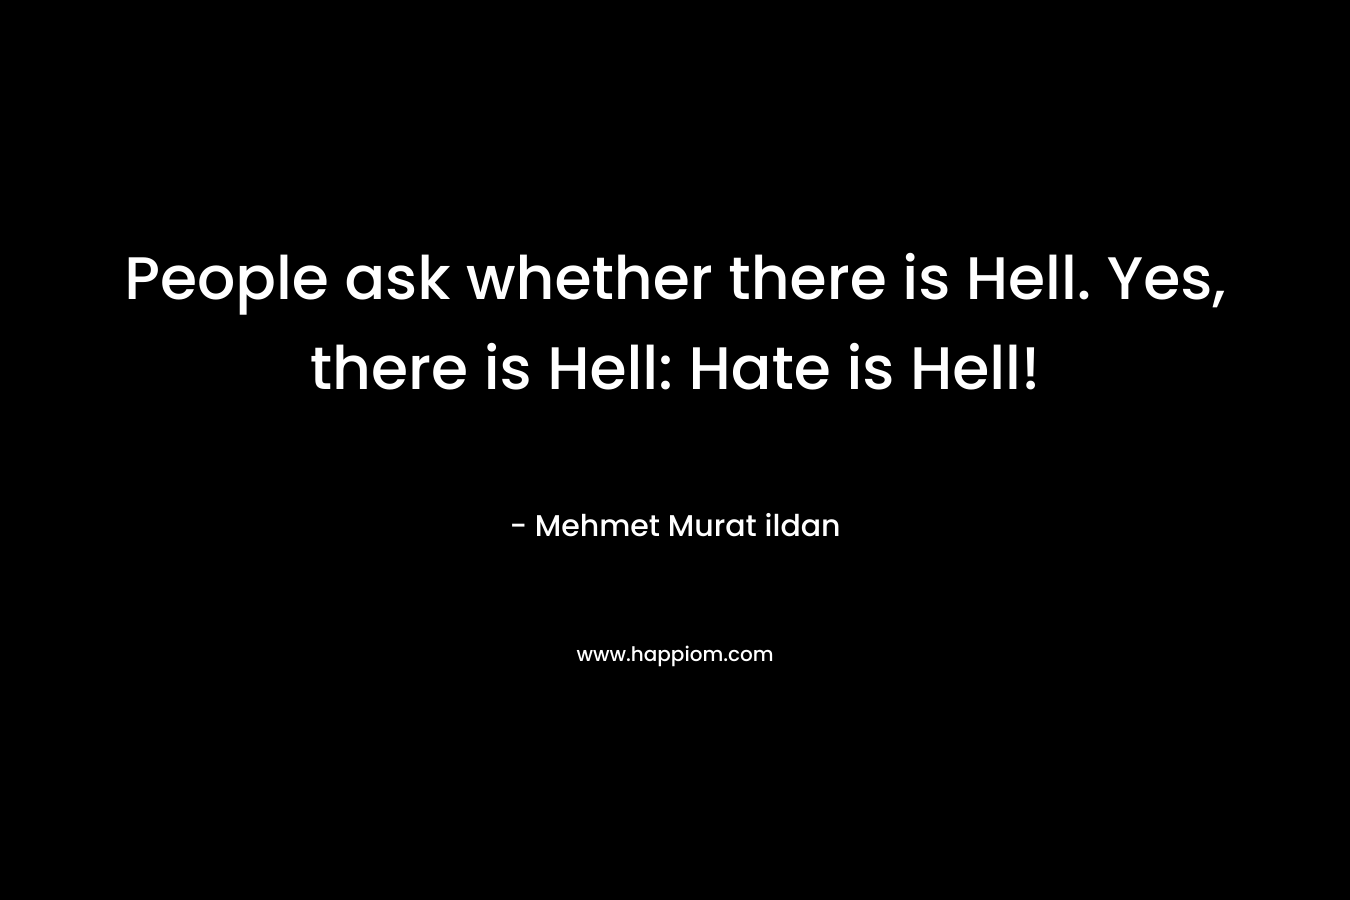 People ask whether there is Hell. Yes, there is Hell: Hate is Hell!